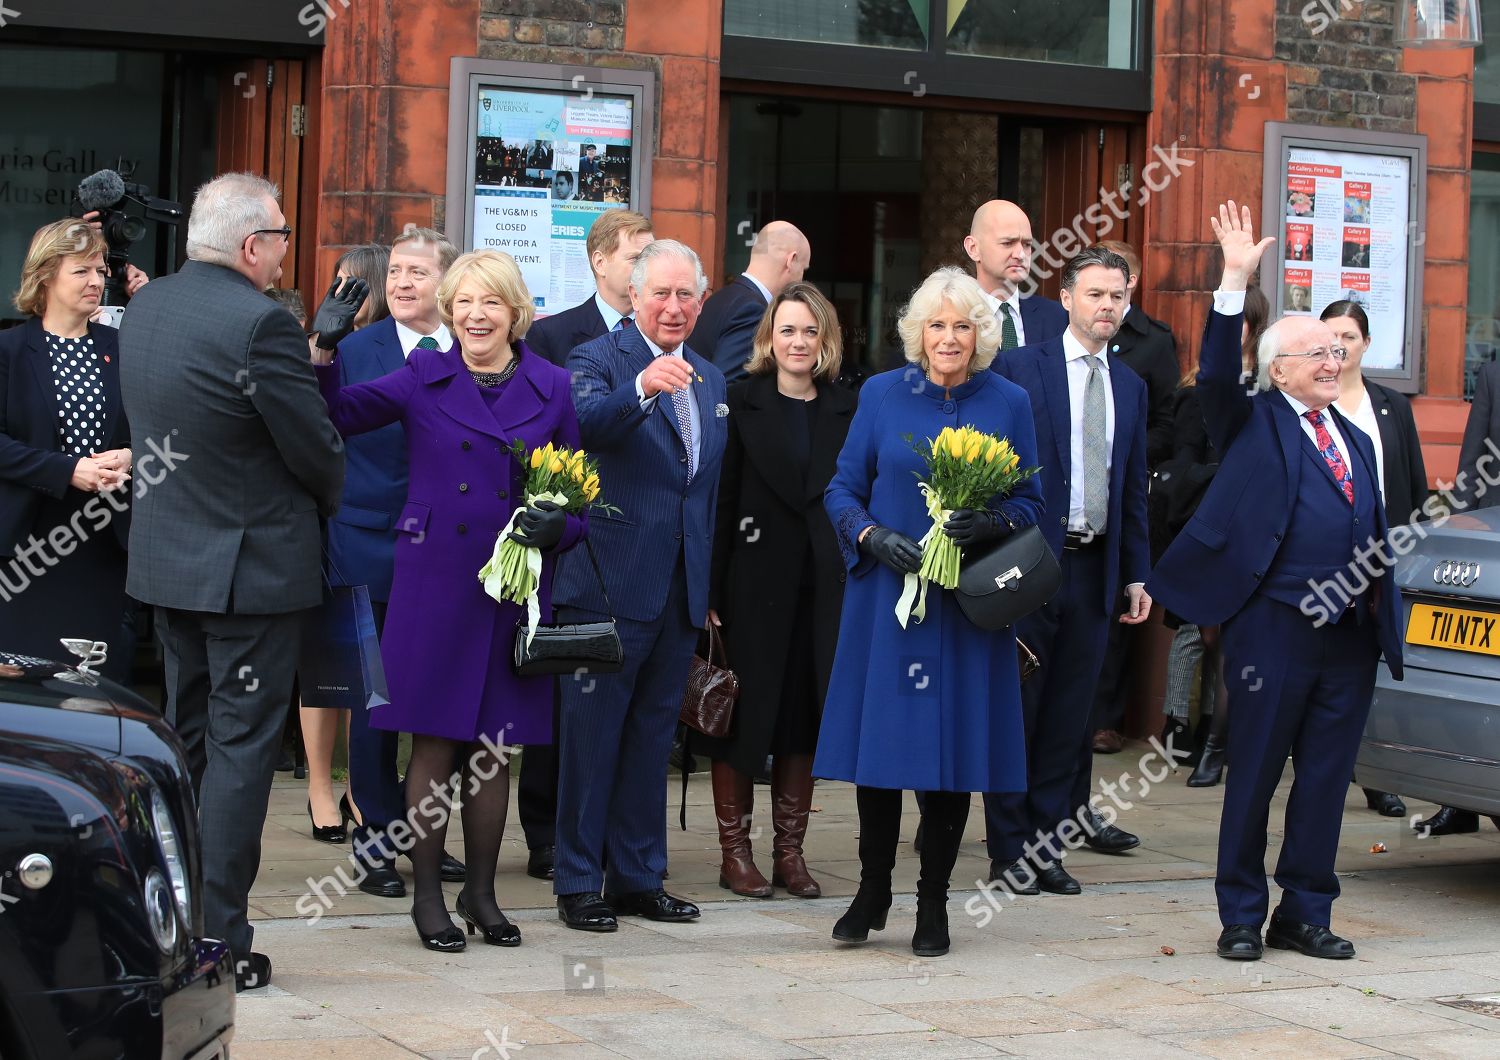 prince-charles-and-duchess-of-cornwall-visit-liverpool-uk-shutterstock-editorial-10102607p.jpg